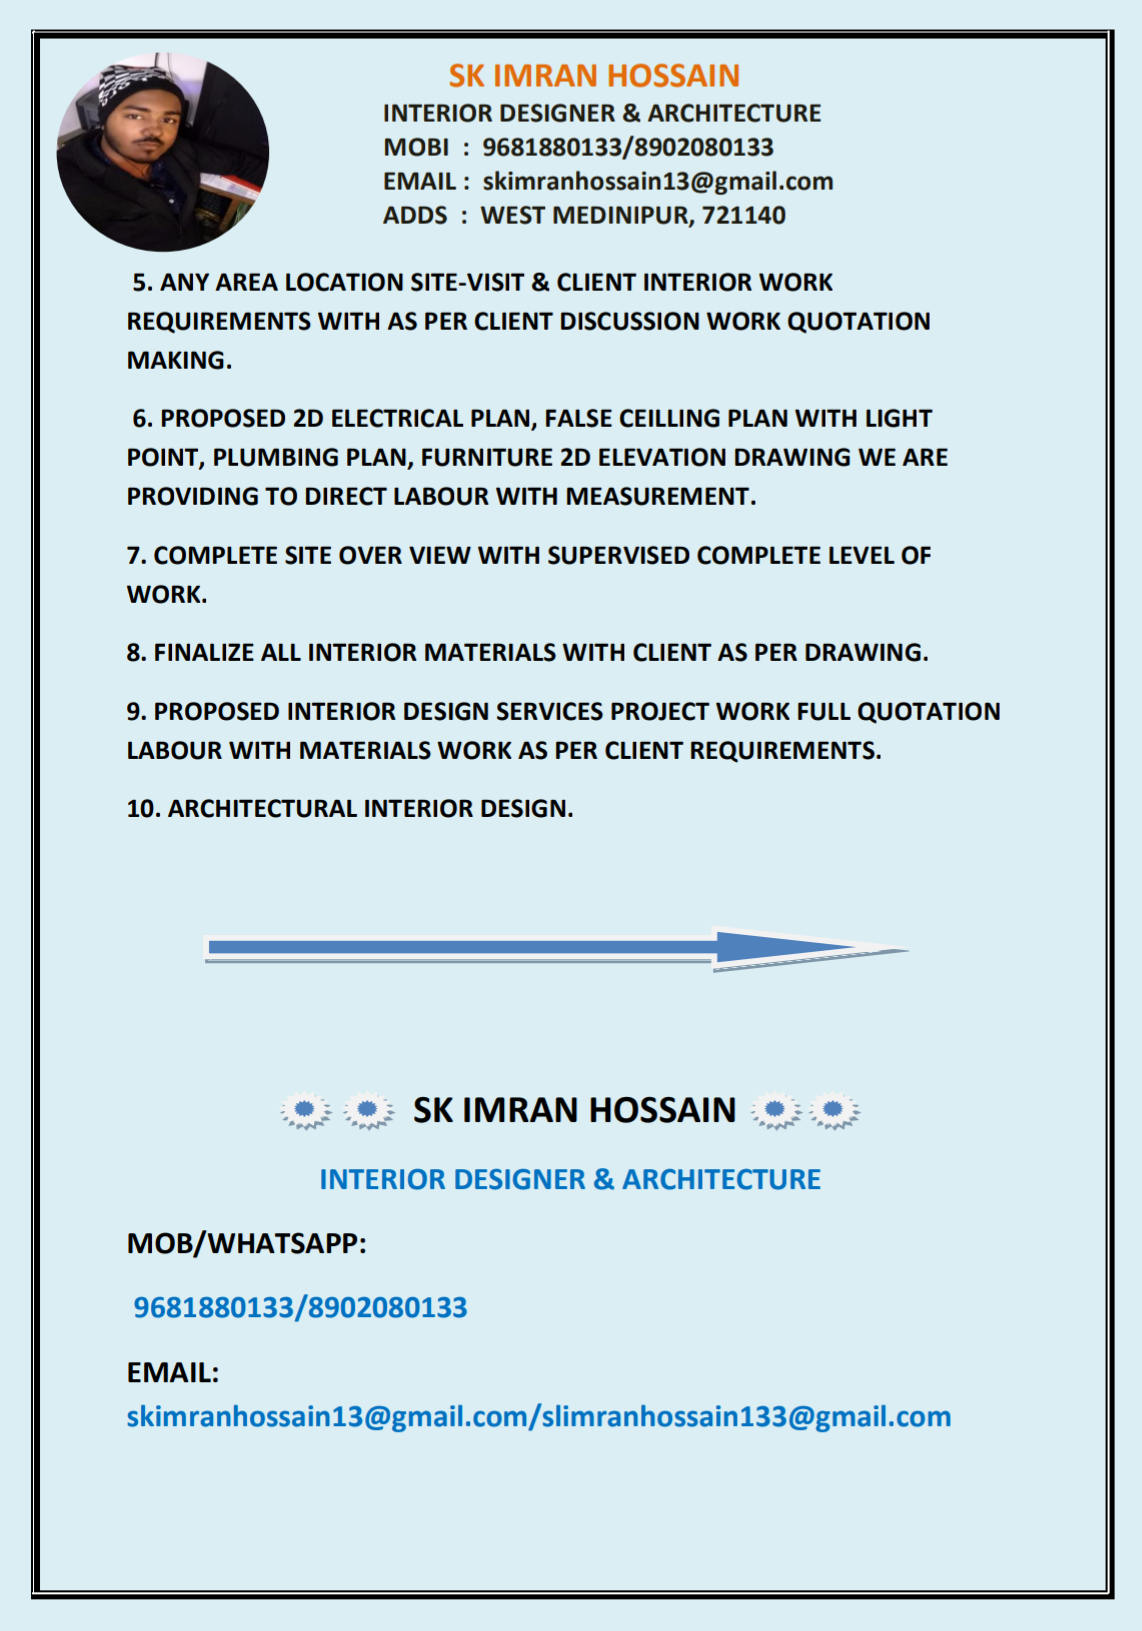 SK IMRAN HOSSAIN
INTERIOR DESIGNER &amp; ARCHITECTURE
MOBI : 9681880133/8902080133
EMAIL : skimranhossain13@gmail.com
ADDS : WEST MEDINIPUR, 721140

5. ANY AREA LOCATION SITE-VISIT &amp; CLIENT INTERIOR WORK
REQUIREMENTS WITH AS PER CLIENT DISCUSSION WORK QUOTATION
MAKING.

6. PROPOSED 2D ELECTRICAL PLAN, FALSE CEILLING PLAN WITH LIGHT
POINT, PLUMBING PLAN, FURNITURE 2D ELEVATION DRAWING WE ARE
PROVIDING TO DIRECT LABOUR WITH MEASUREMENT.

7. COMPLETE SITE OVER VIEW WITH SUPERVISED COMPLETE LEVEL OF
WORK.

8. FINALIZE ALL INTERIOR MATERIALS WITH CLIENT AS PER DRAWING.

9. PROPOSED INTERIOR DESIGN SERVICES PROJECT WORK FULL QUOTATION
LABOUR WITH MATERIALS WORK AS PER CLIENT REQUIREMENTS.

10. ARCHITECTURAL INTERIOR DESIGN.

—

®:.®: SKIMRAN HOSSAIN »:
INTERIOR DESIGNER &amp; ARCHITECTURE
MOB/WHATSAPP:
9681880133/8902080133

EMAIL:
skimranhossain13@gmail.com/slimranhossain133@gmail.com